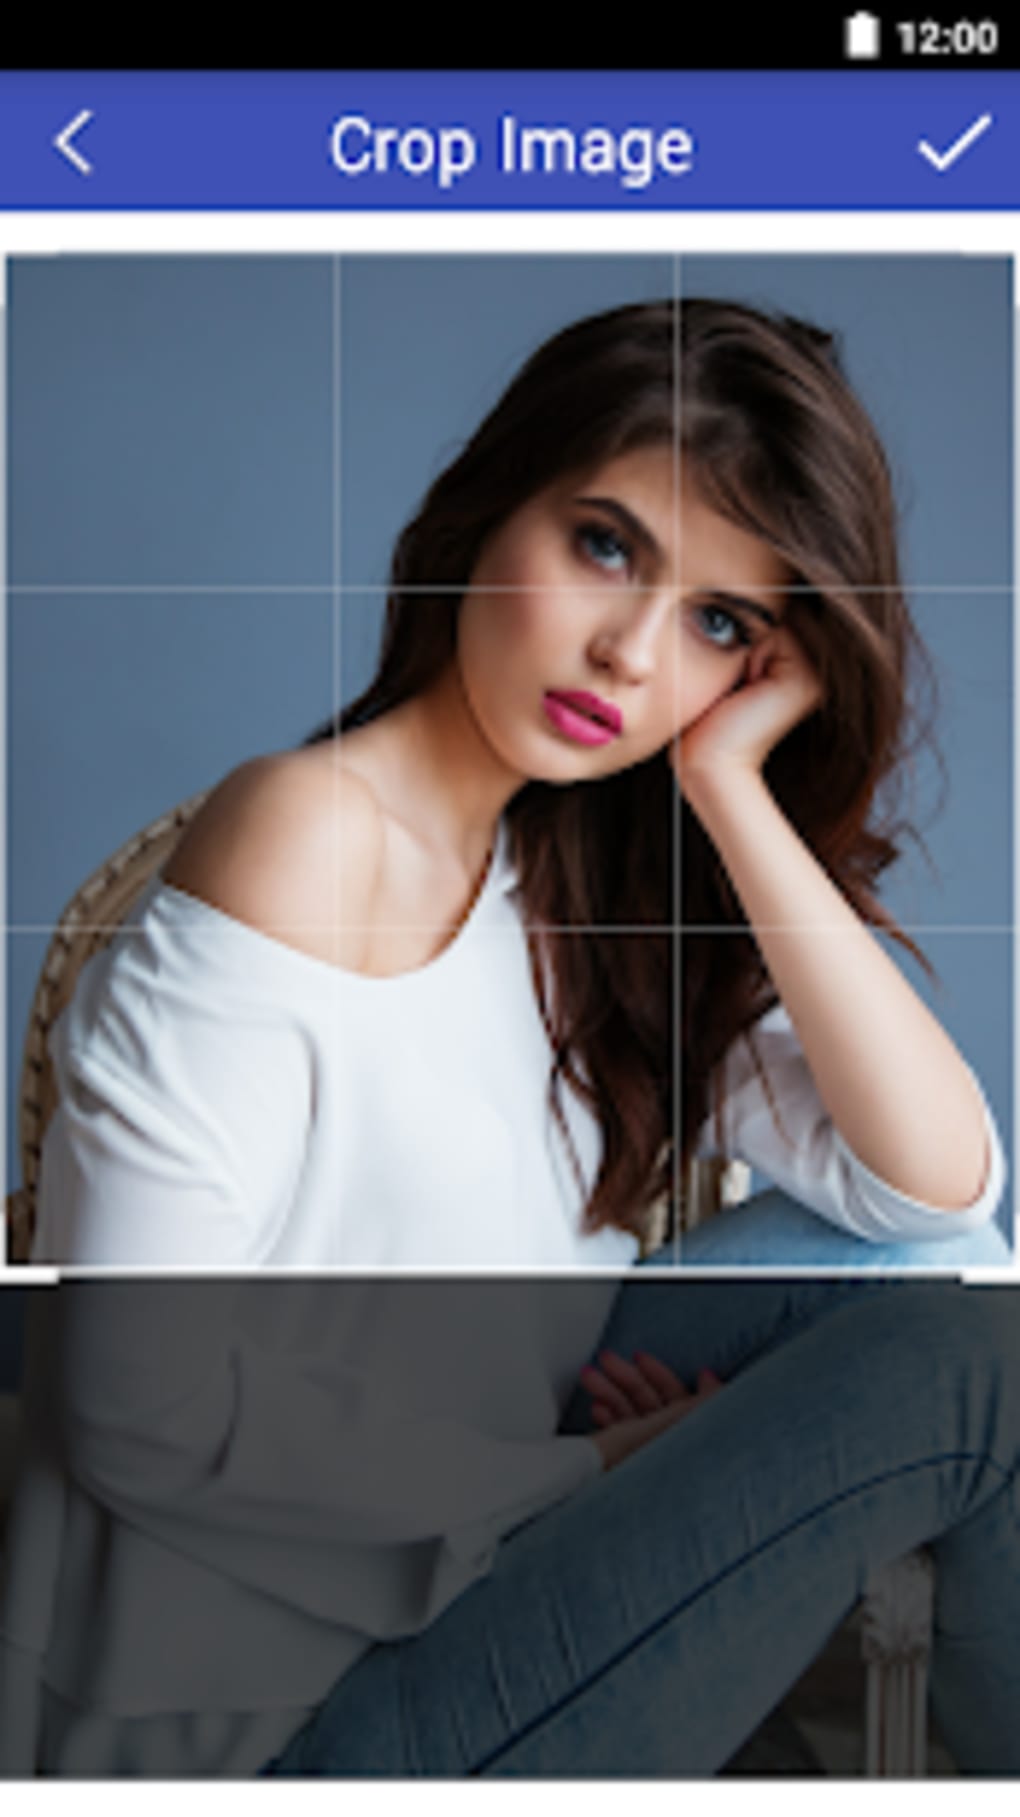 Auto Background Remover - Background Changer APK for Android - Download